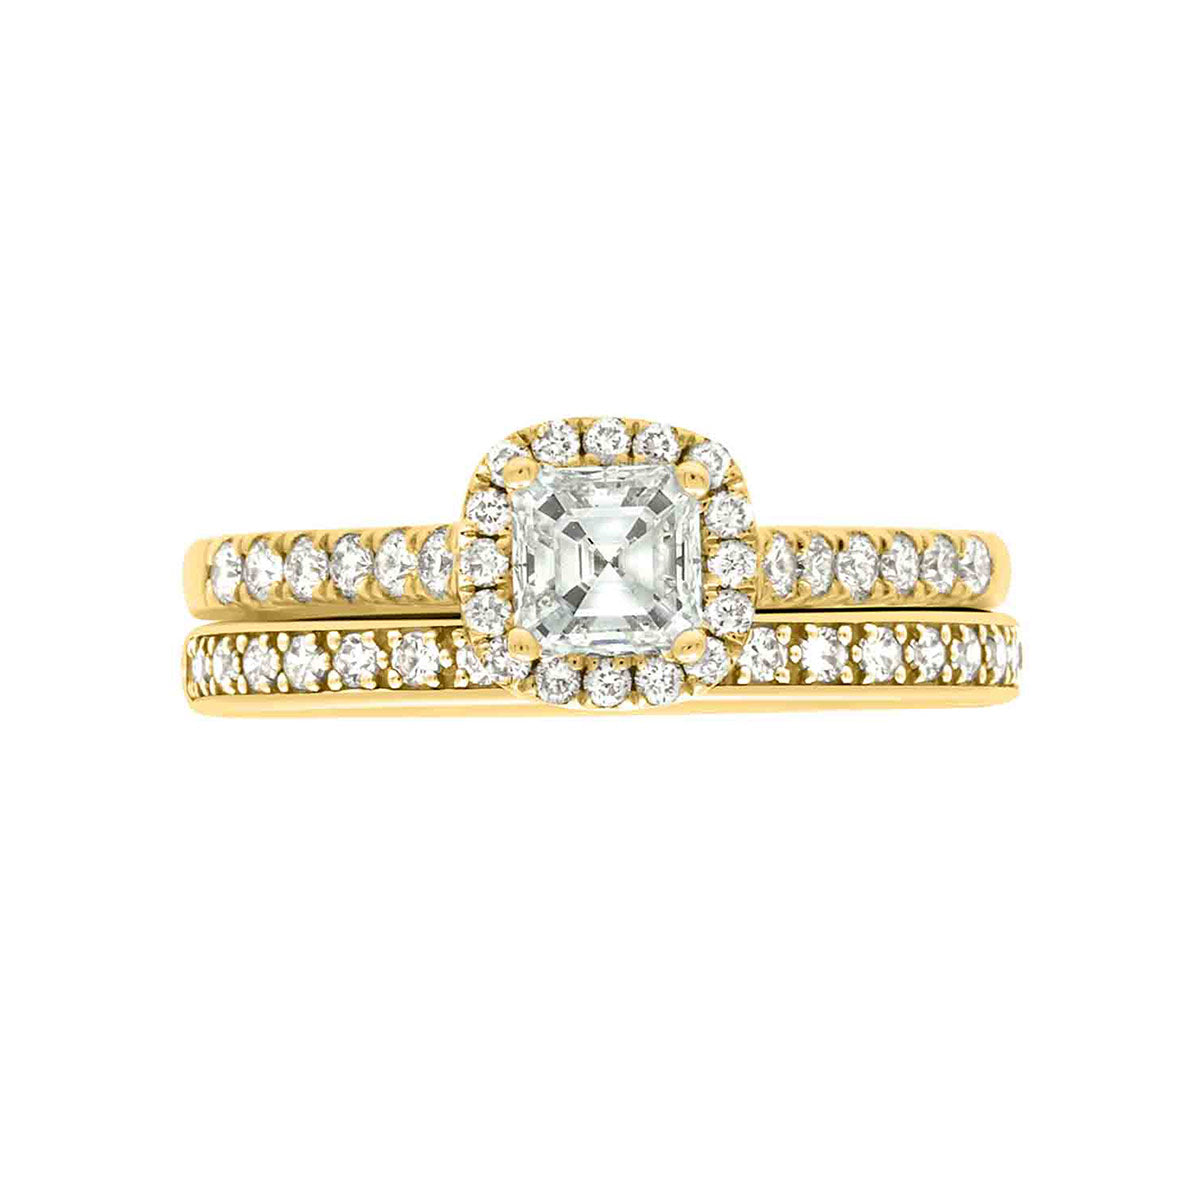 Asscher Halo Diamond Ring in yellow gold with a diamond set wedding band